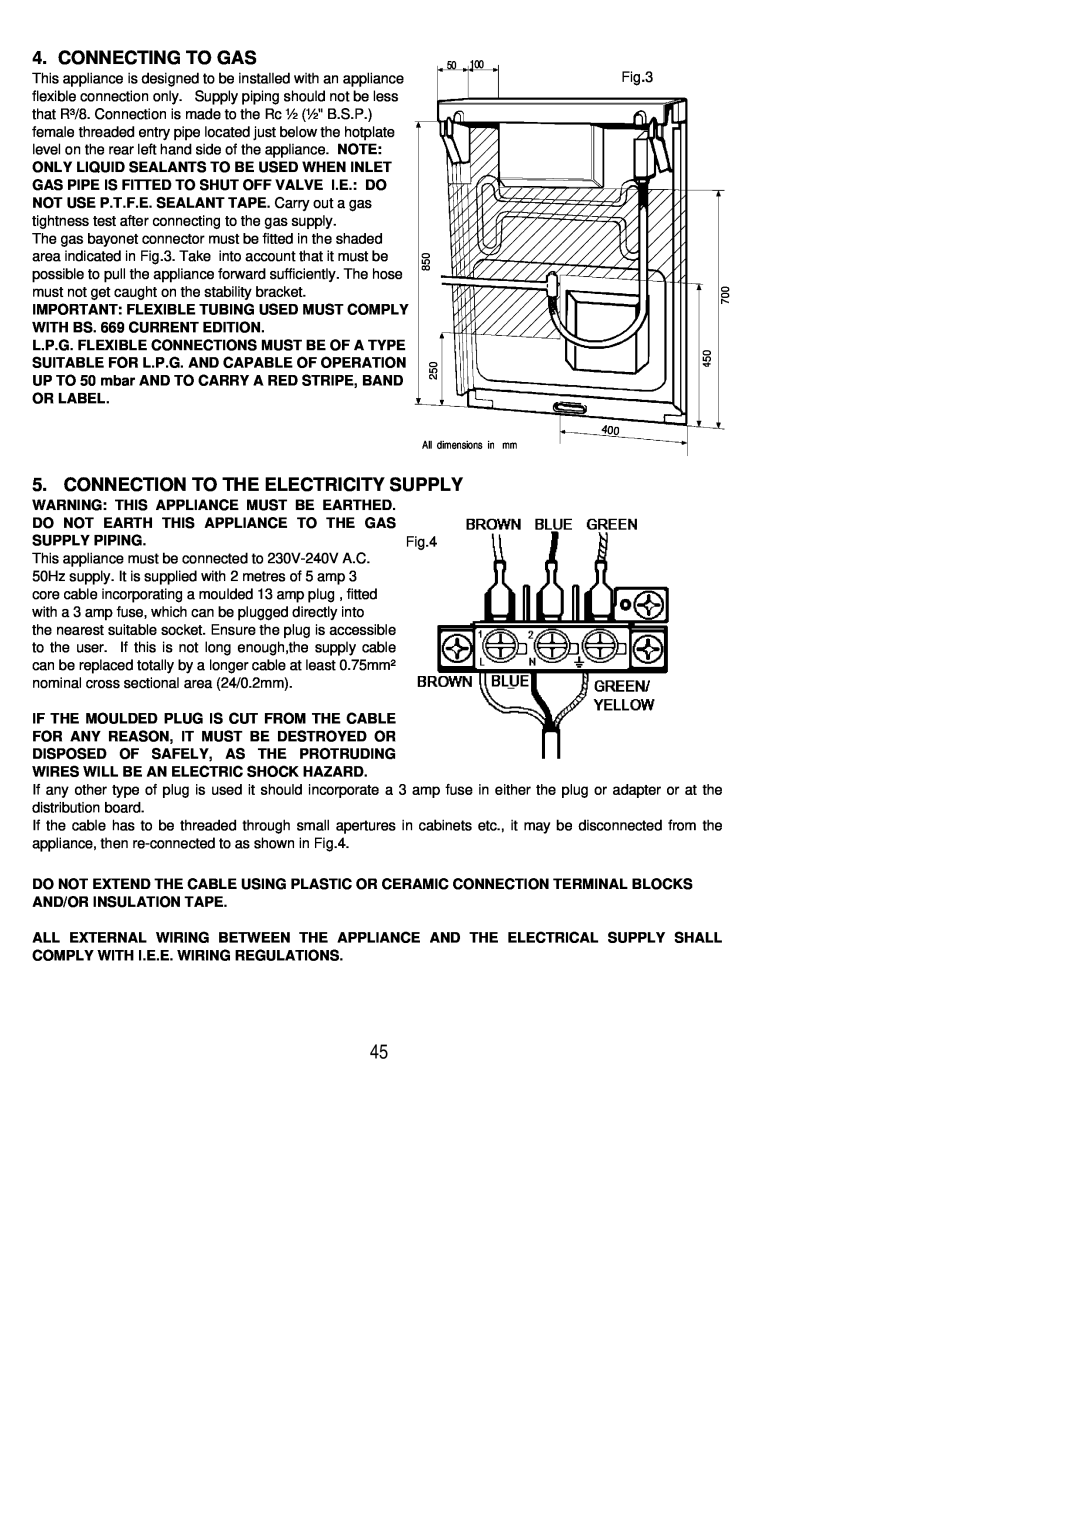 Electrolux CSG 558 installation instructions Connecting To Gas, Connection To The Electricity Supply 